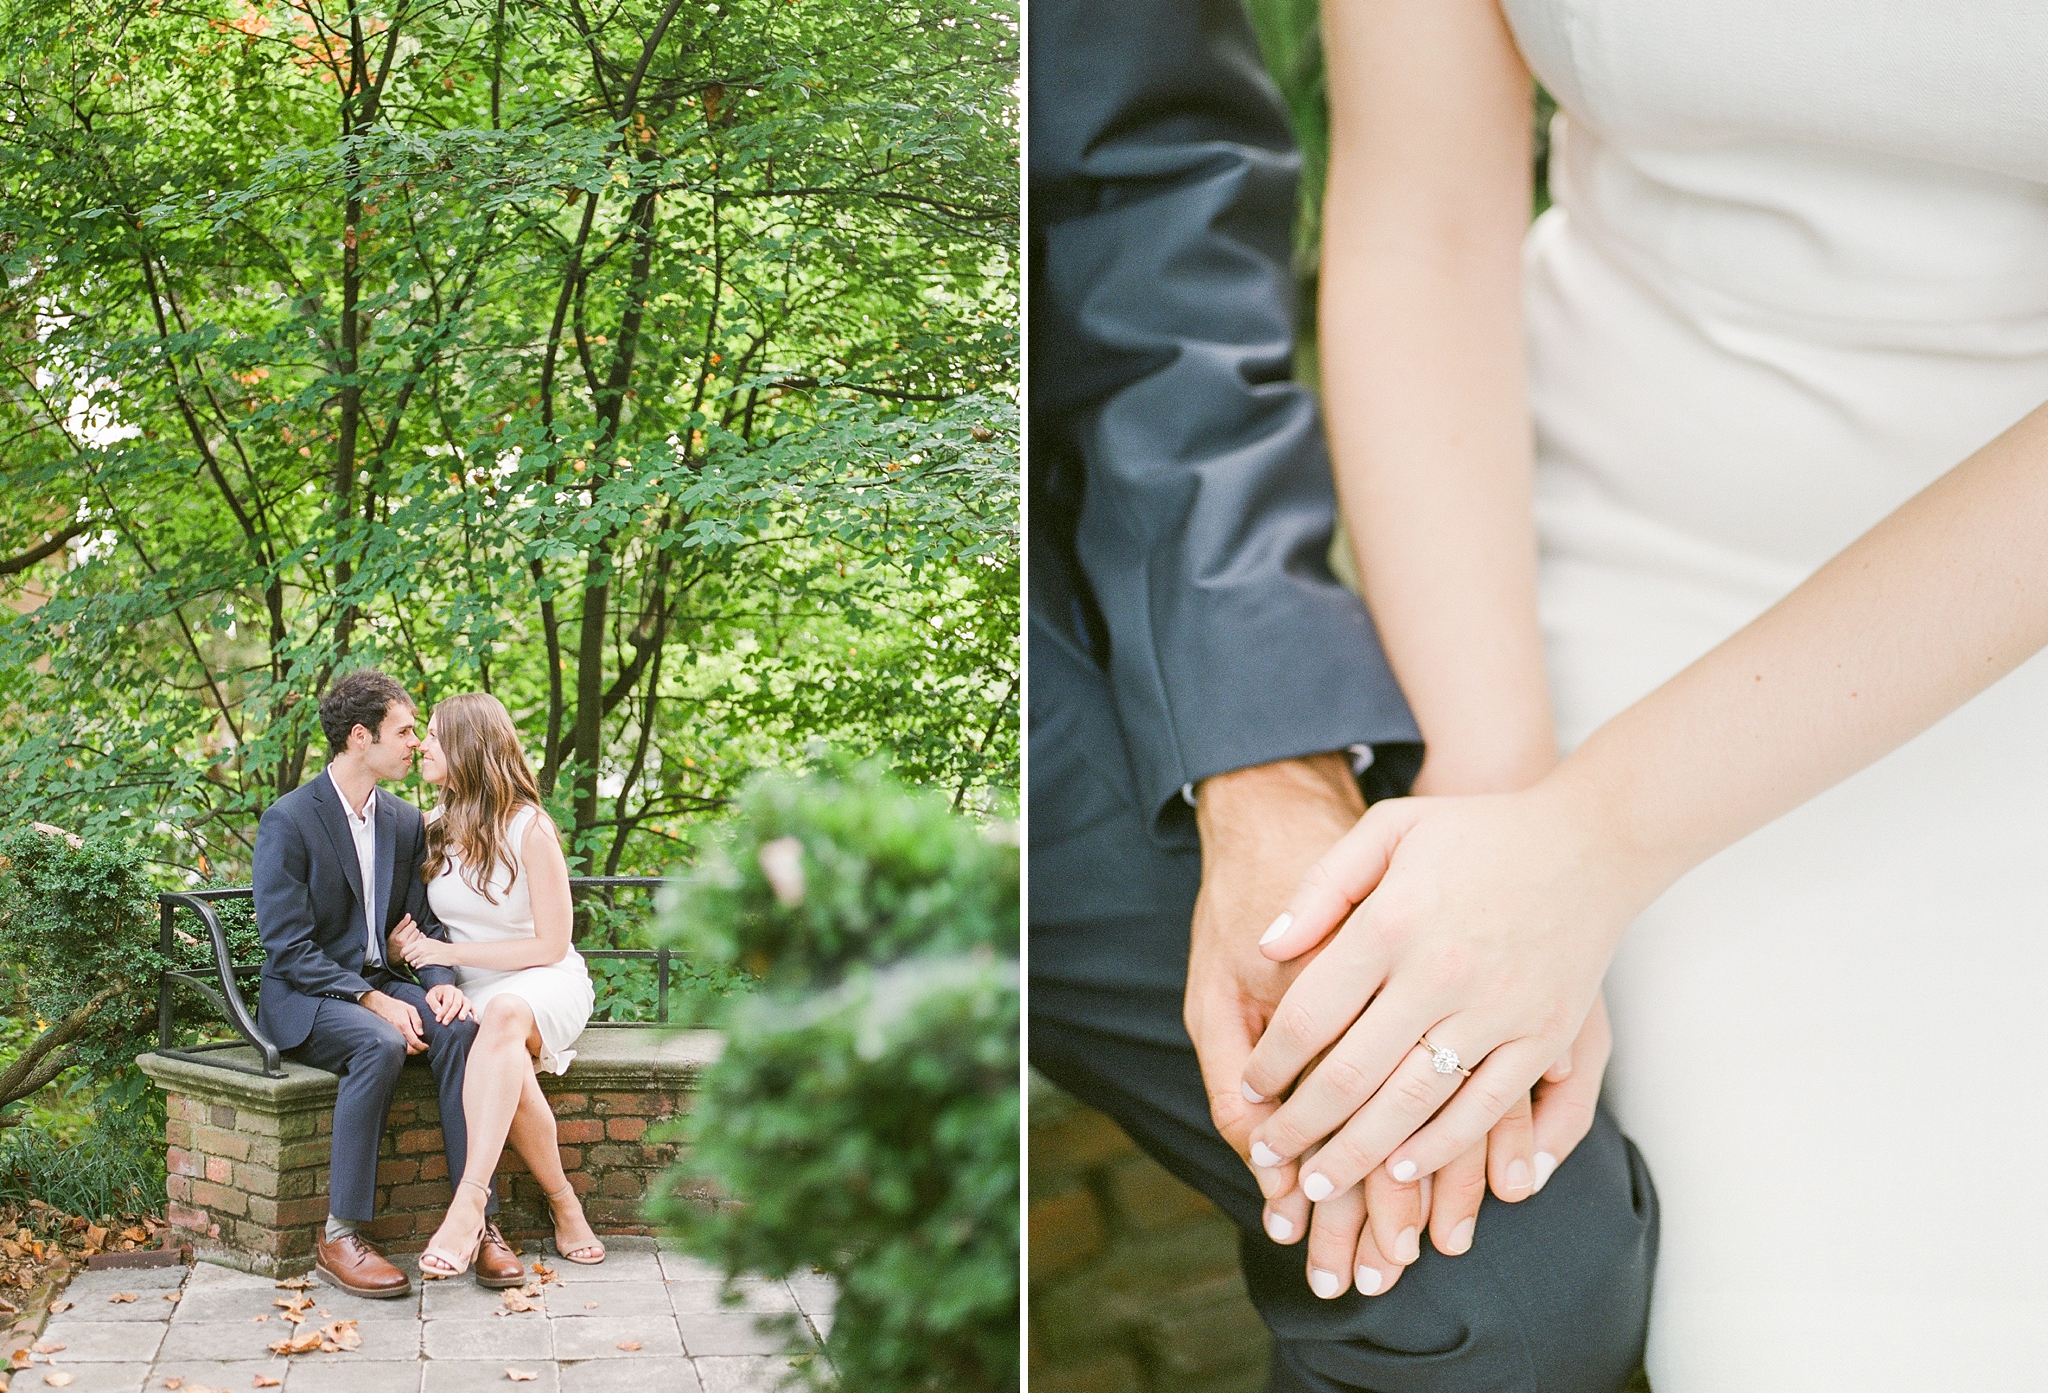 A romantic engagement session in the stunning gardens at Tudor Place in downtown Washington, DC.